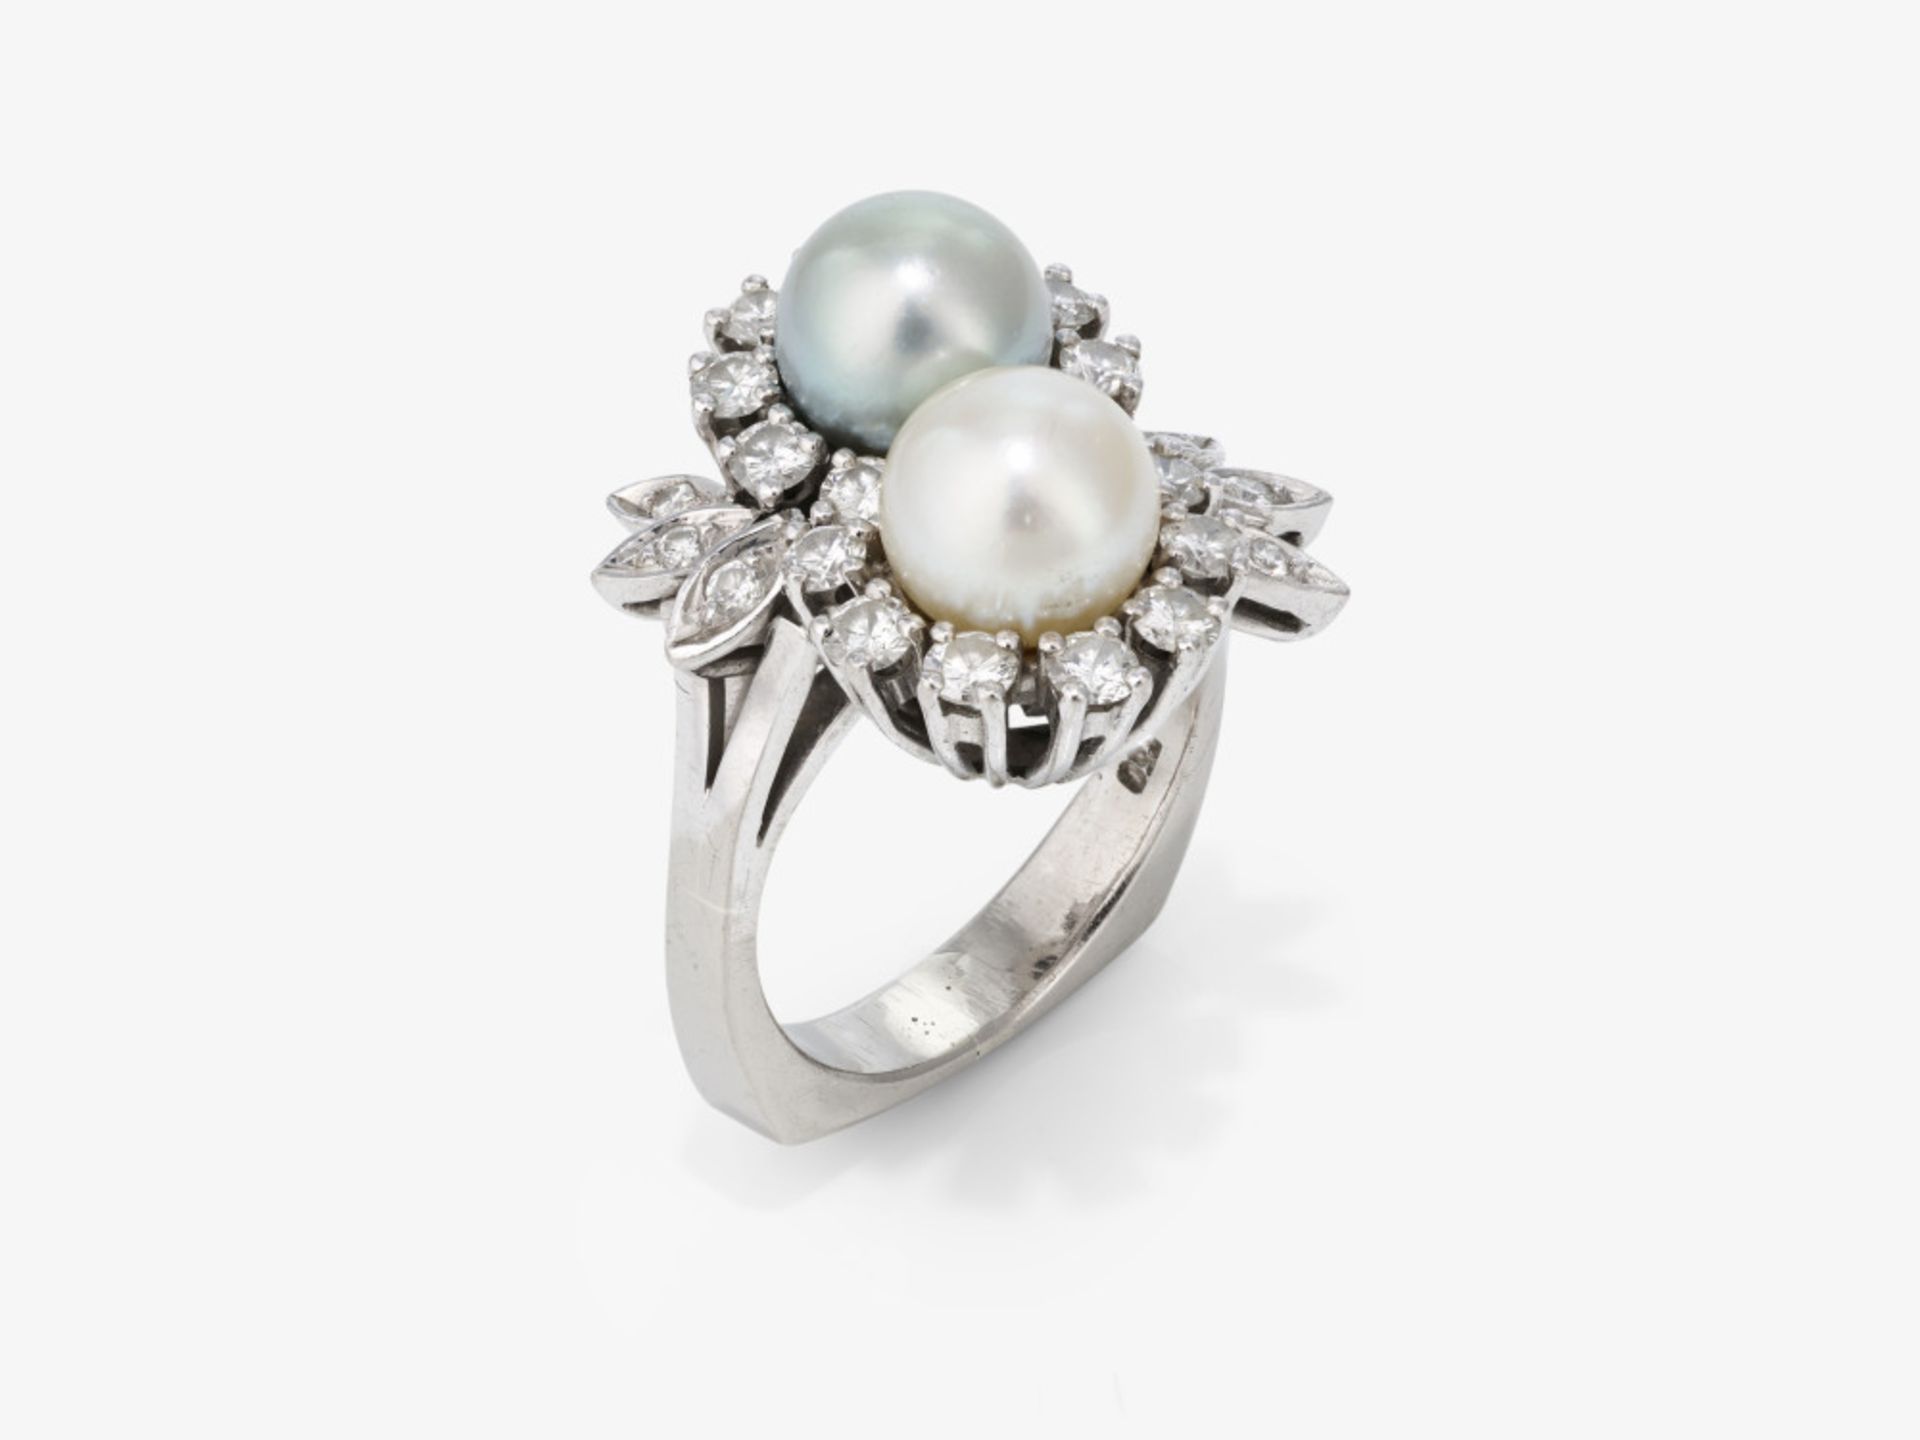 A ring with a white and grey cultured pearl and brilliant-cut diamonds - Germany, 1970s